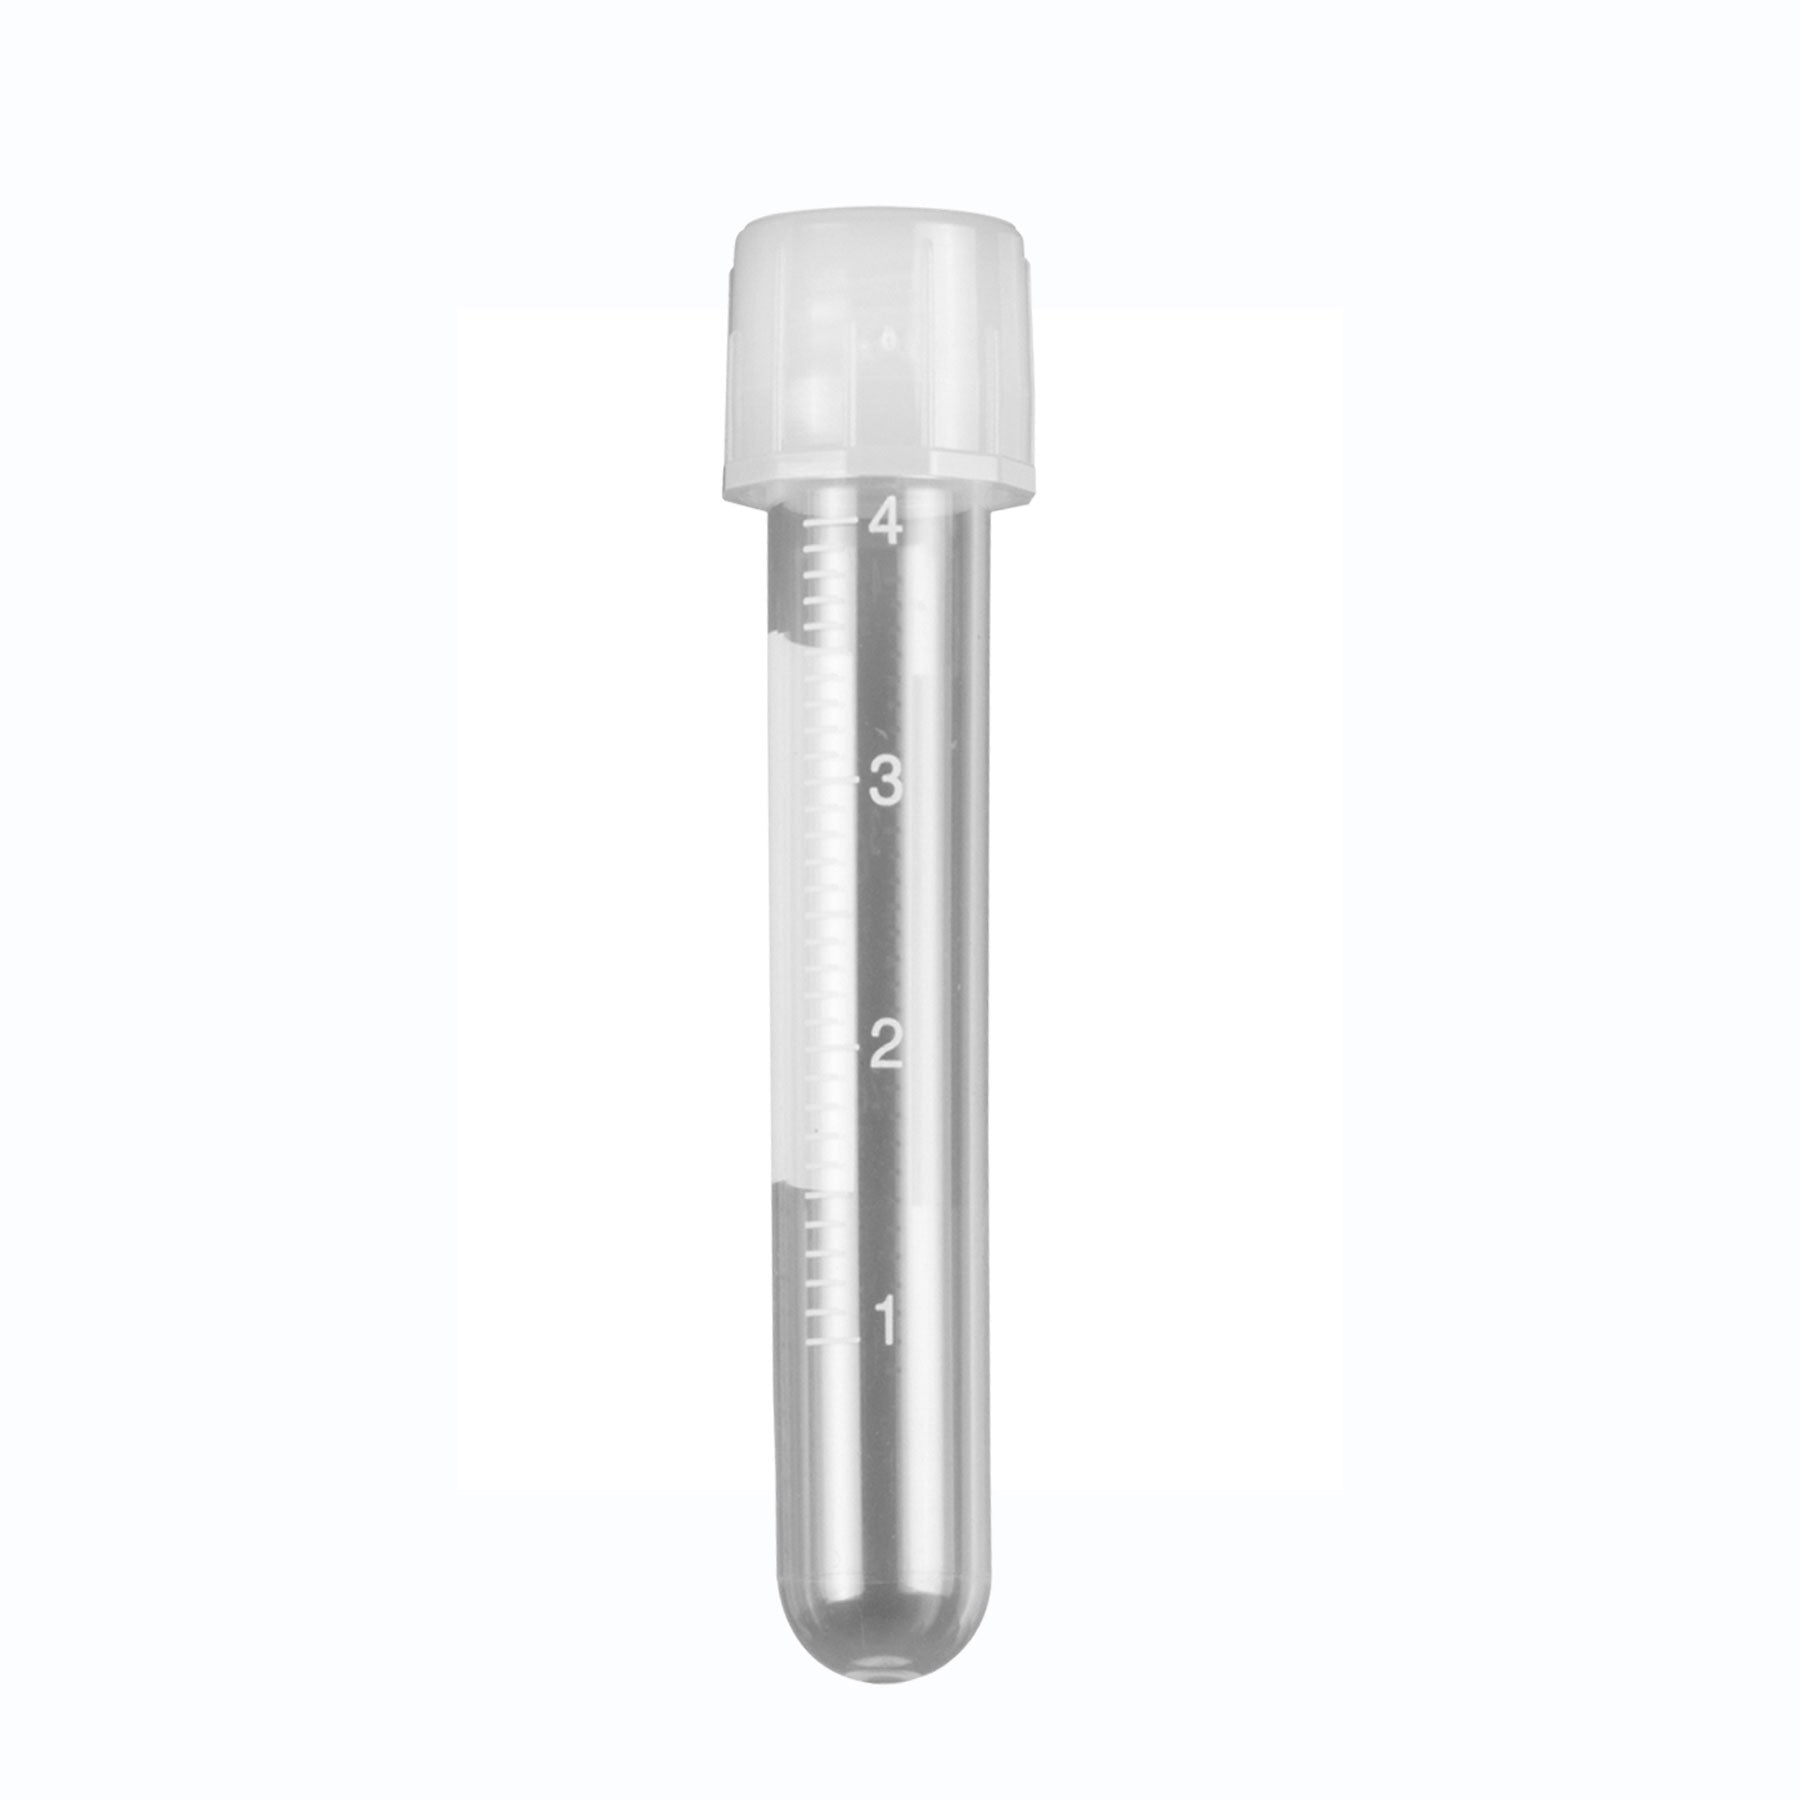 MTC Bio T8734, DuoClick Culture Tube, 5ml, 12 X 75Mm, PP, with Attached 2-Position Screw-Cap, Printed Graduations, Sterile, Individually Wrapped, 500/Case